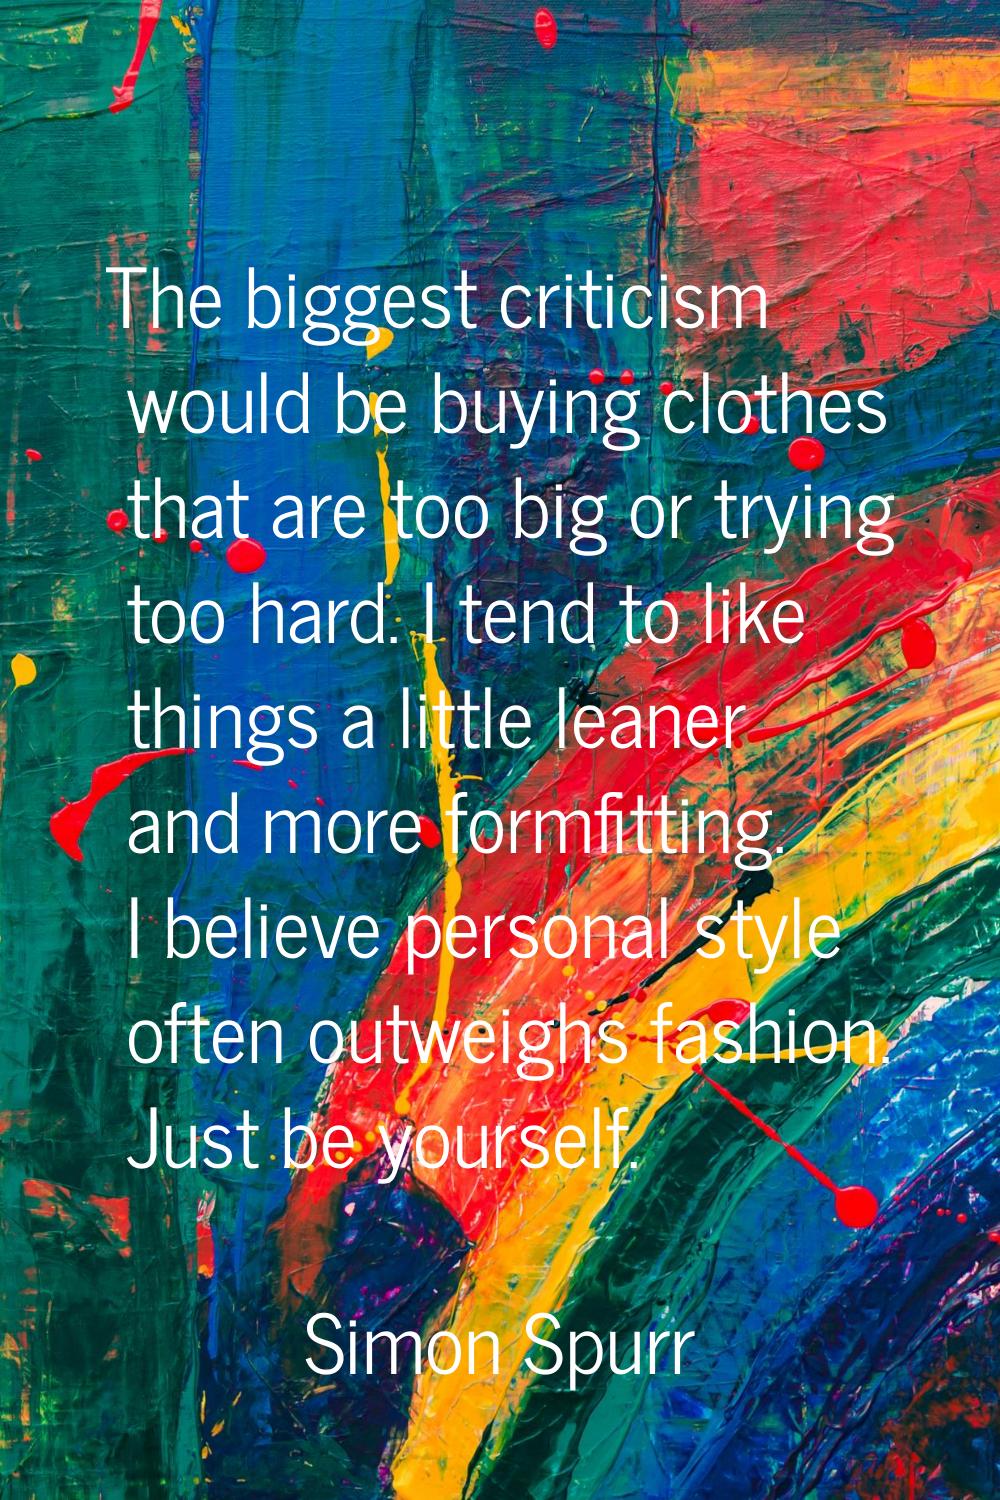 The biggest criticism would be buying clothes that are too big or trying too hard. I tend to like t